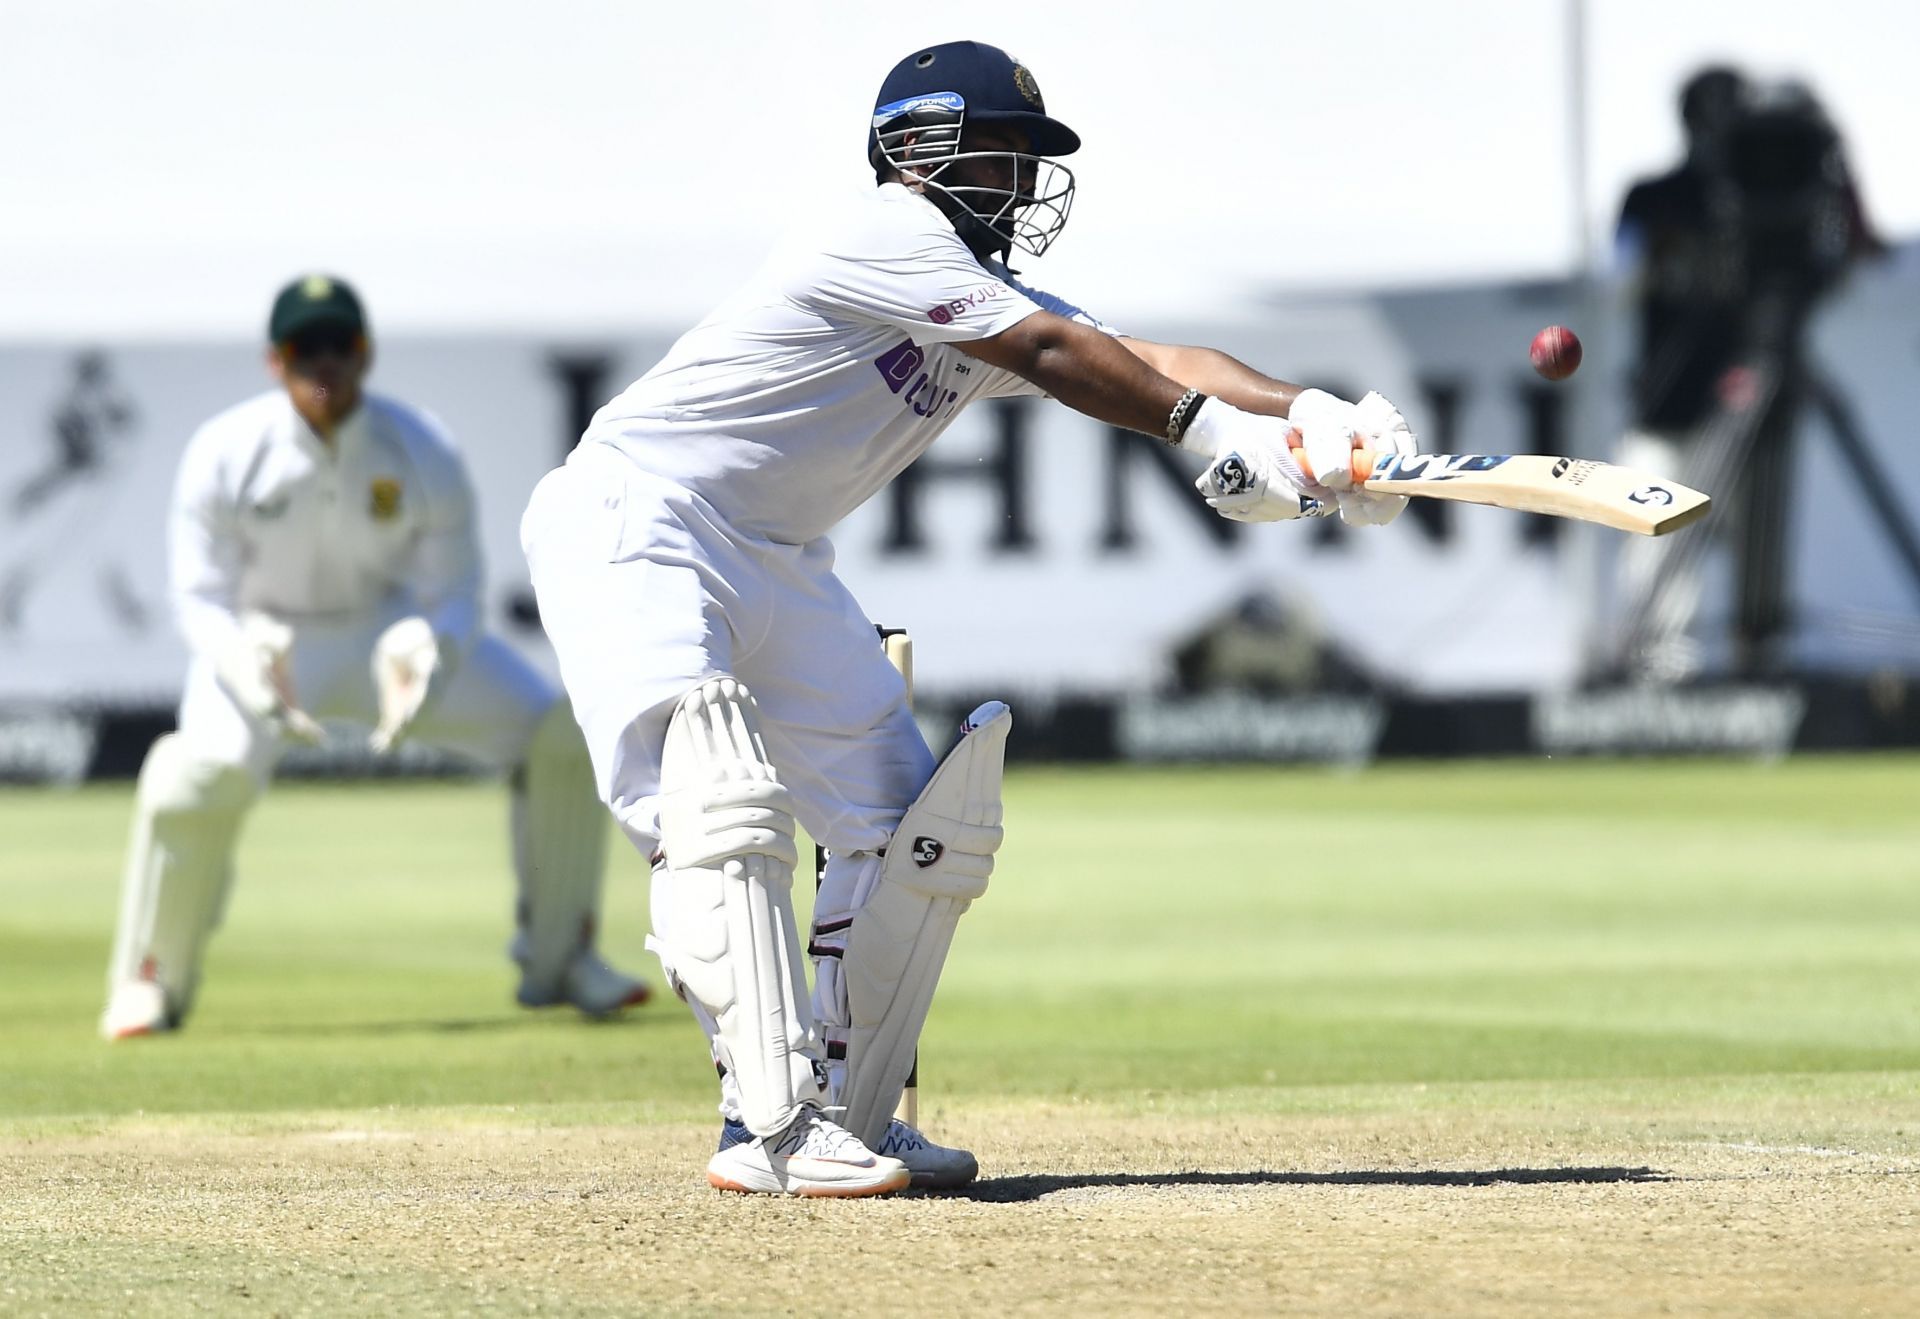 Rishabh Pant was forced to play some adventurous shots towards the latter stages of his innings